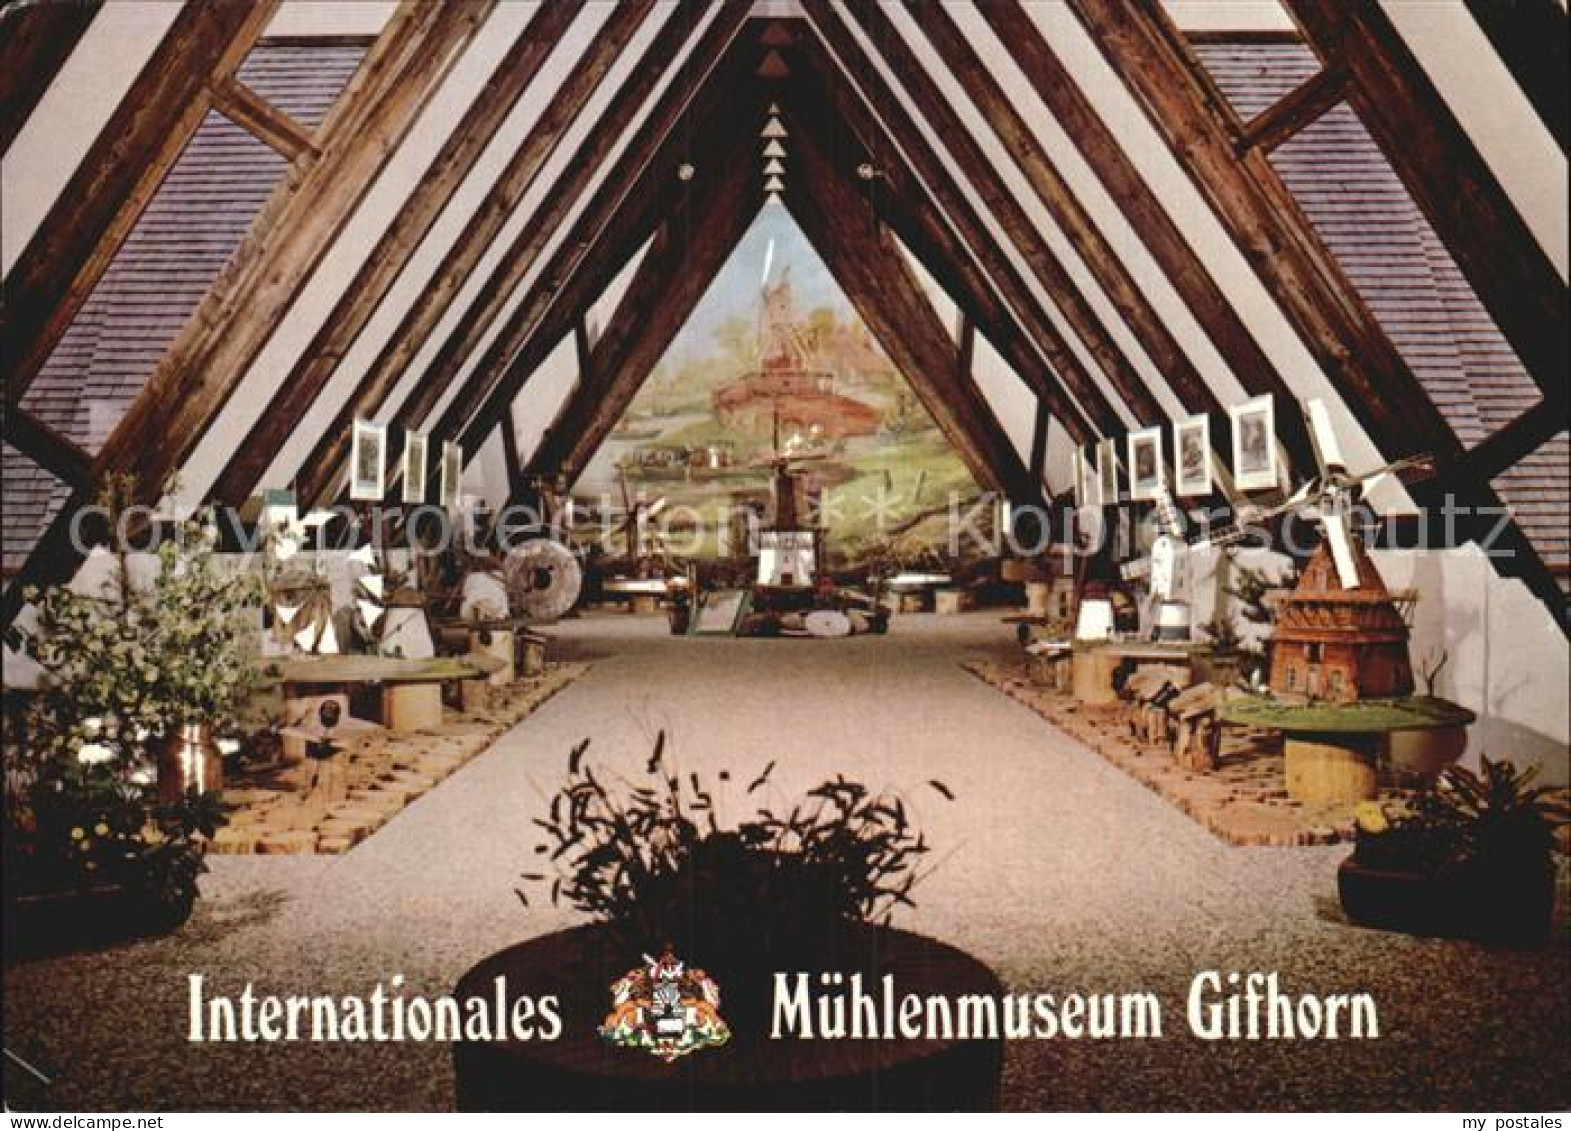 72599683 Gifhorn Internationales Muehlenmuseum Gifhorn - Gifhorn